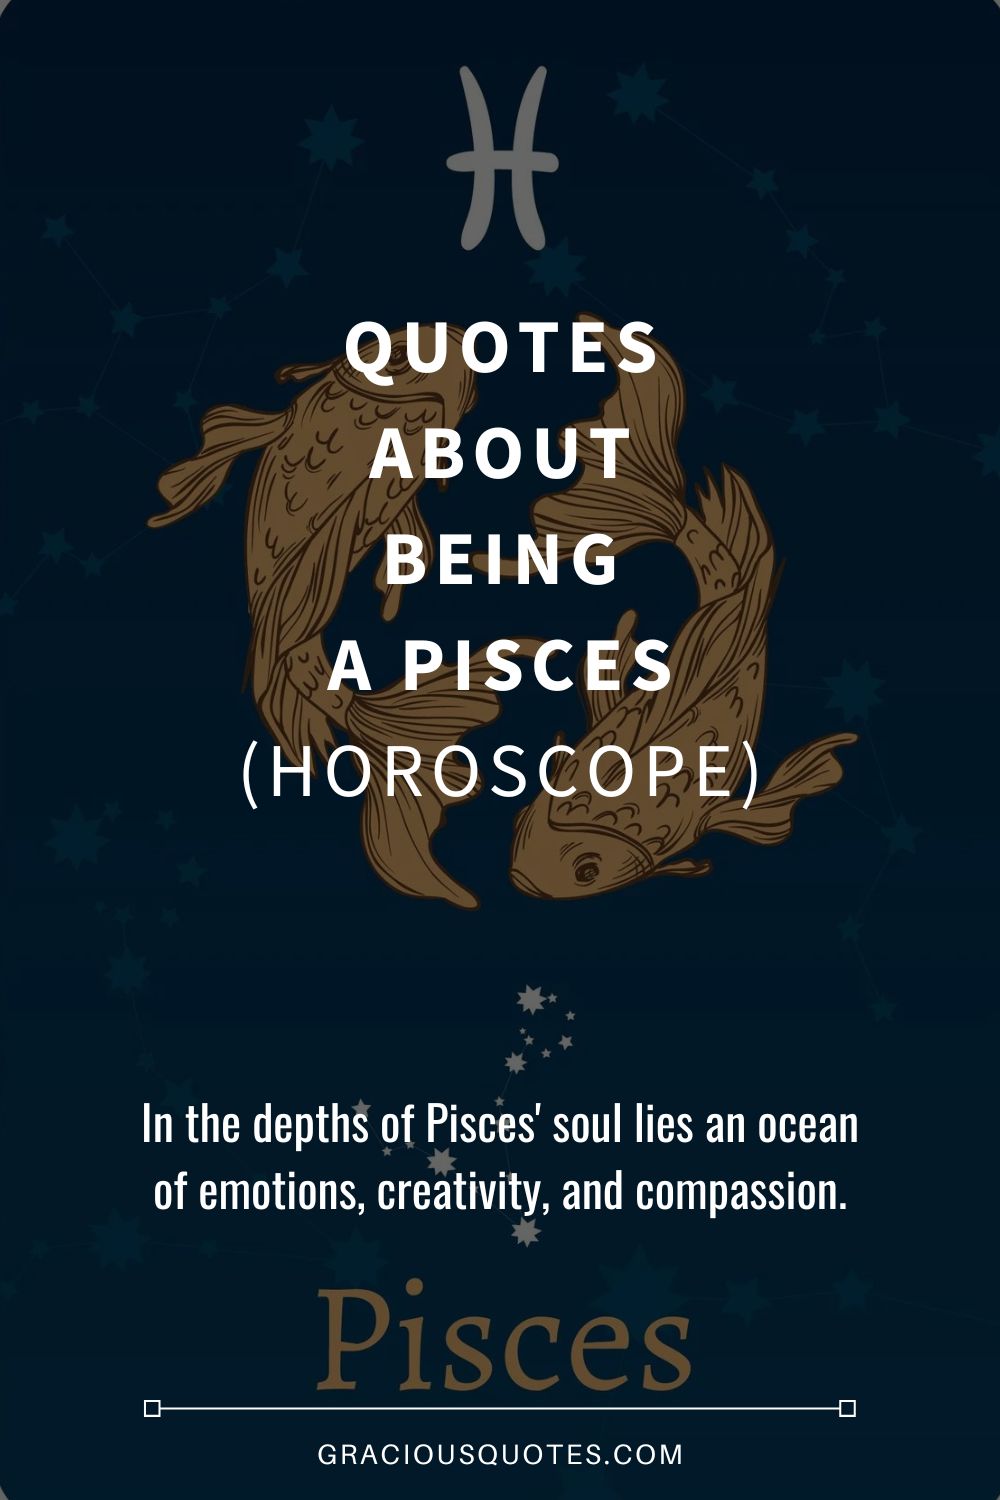 Quotes About Being a Pisces (HOROSCOPE) - Gracious Quotes